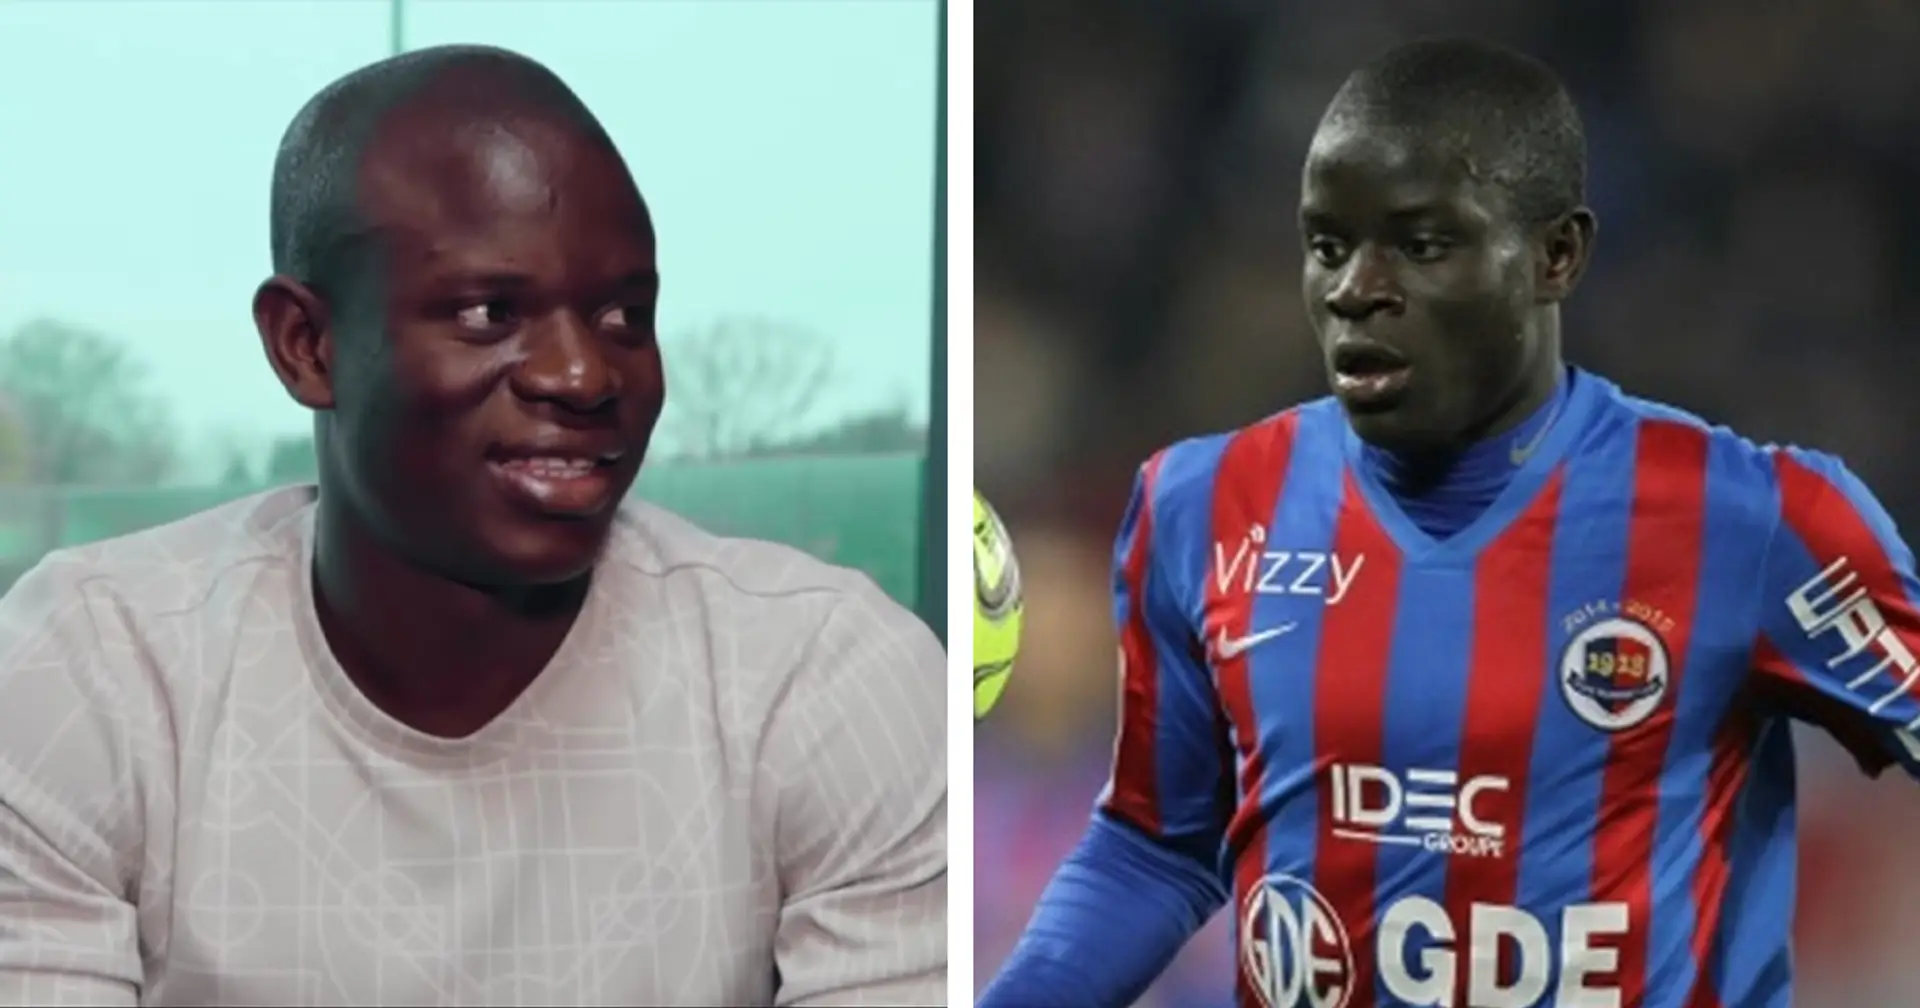 N’Golo Kante: '9 years ago I played Boulogne reserves; now I’m with Chelsea, lucky enough to play in Champions League final'